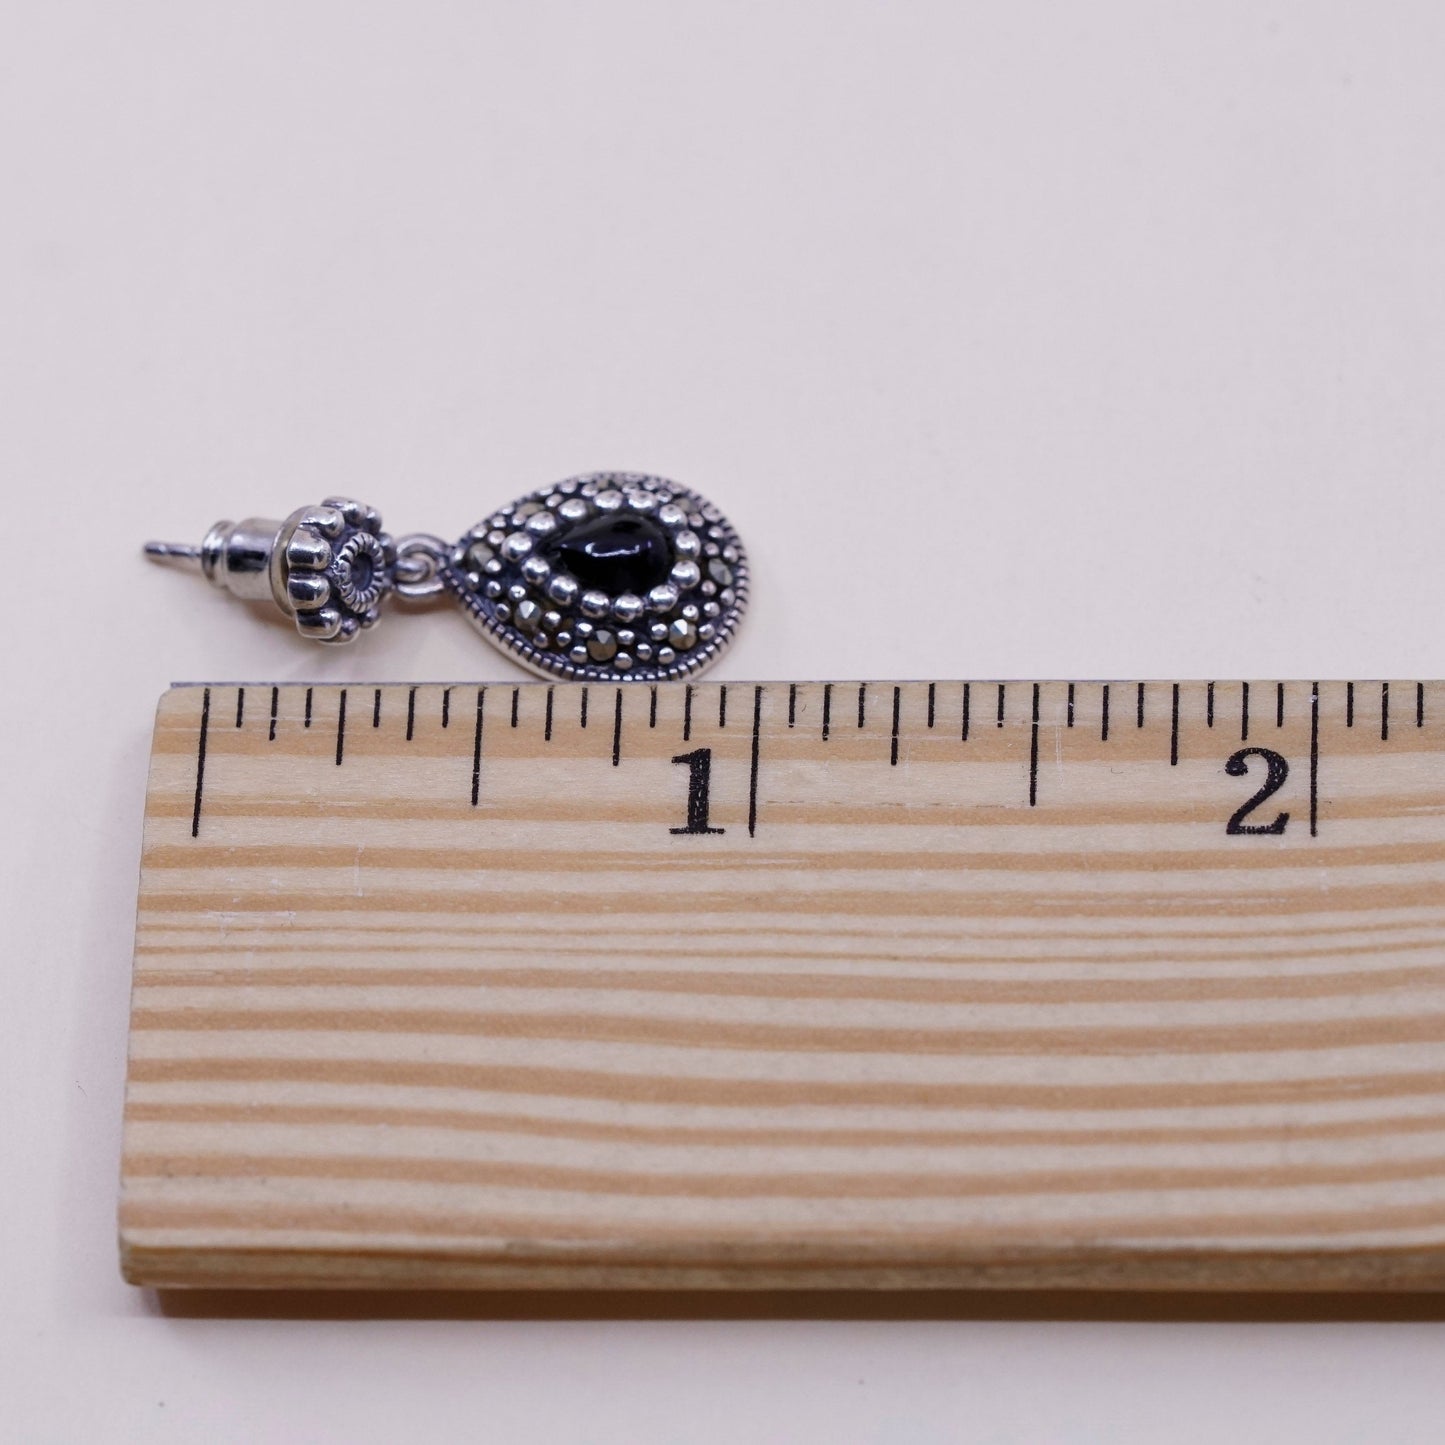 Vintage Sterling silver handmade earrings, 925 drops w/ obsidian and marcasite